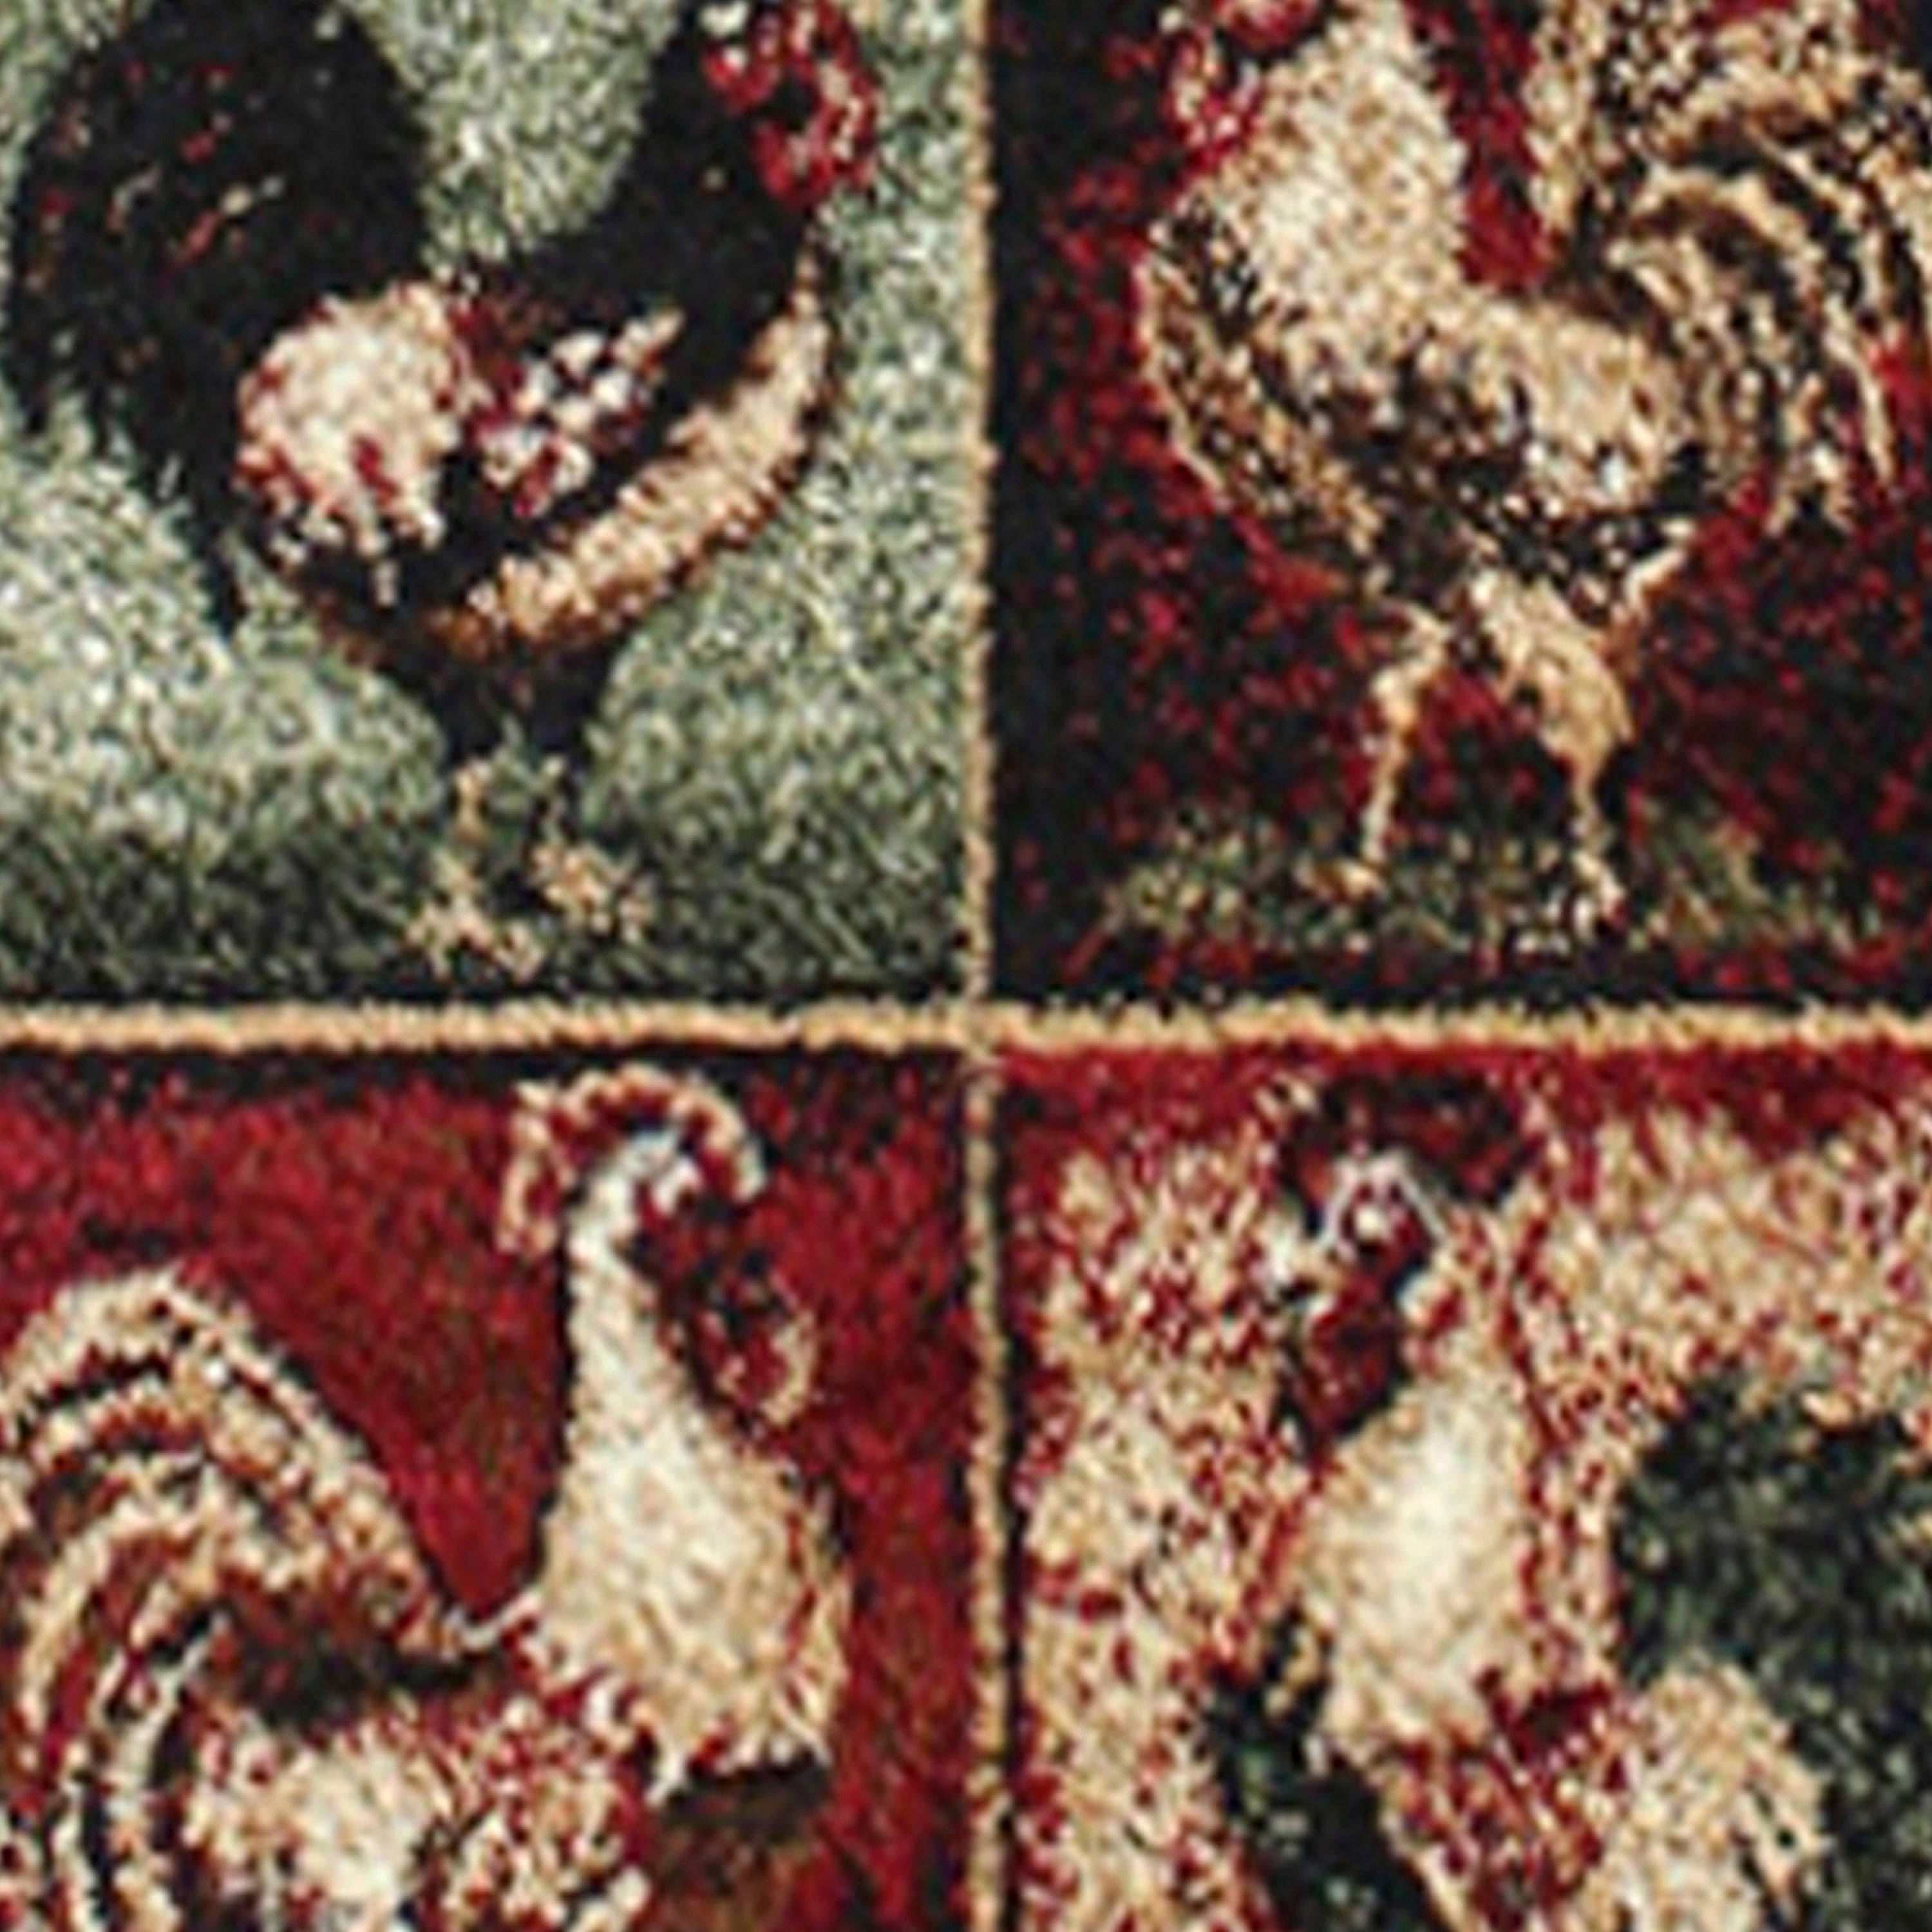 Gallus Collection Rooster Themed Olefin Area Rug with Jute Backing for Kitchen, Living Room, Bedroom-Indoor Area Rug-Flash Furniture-Wall2Wall Furnishings